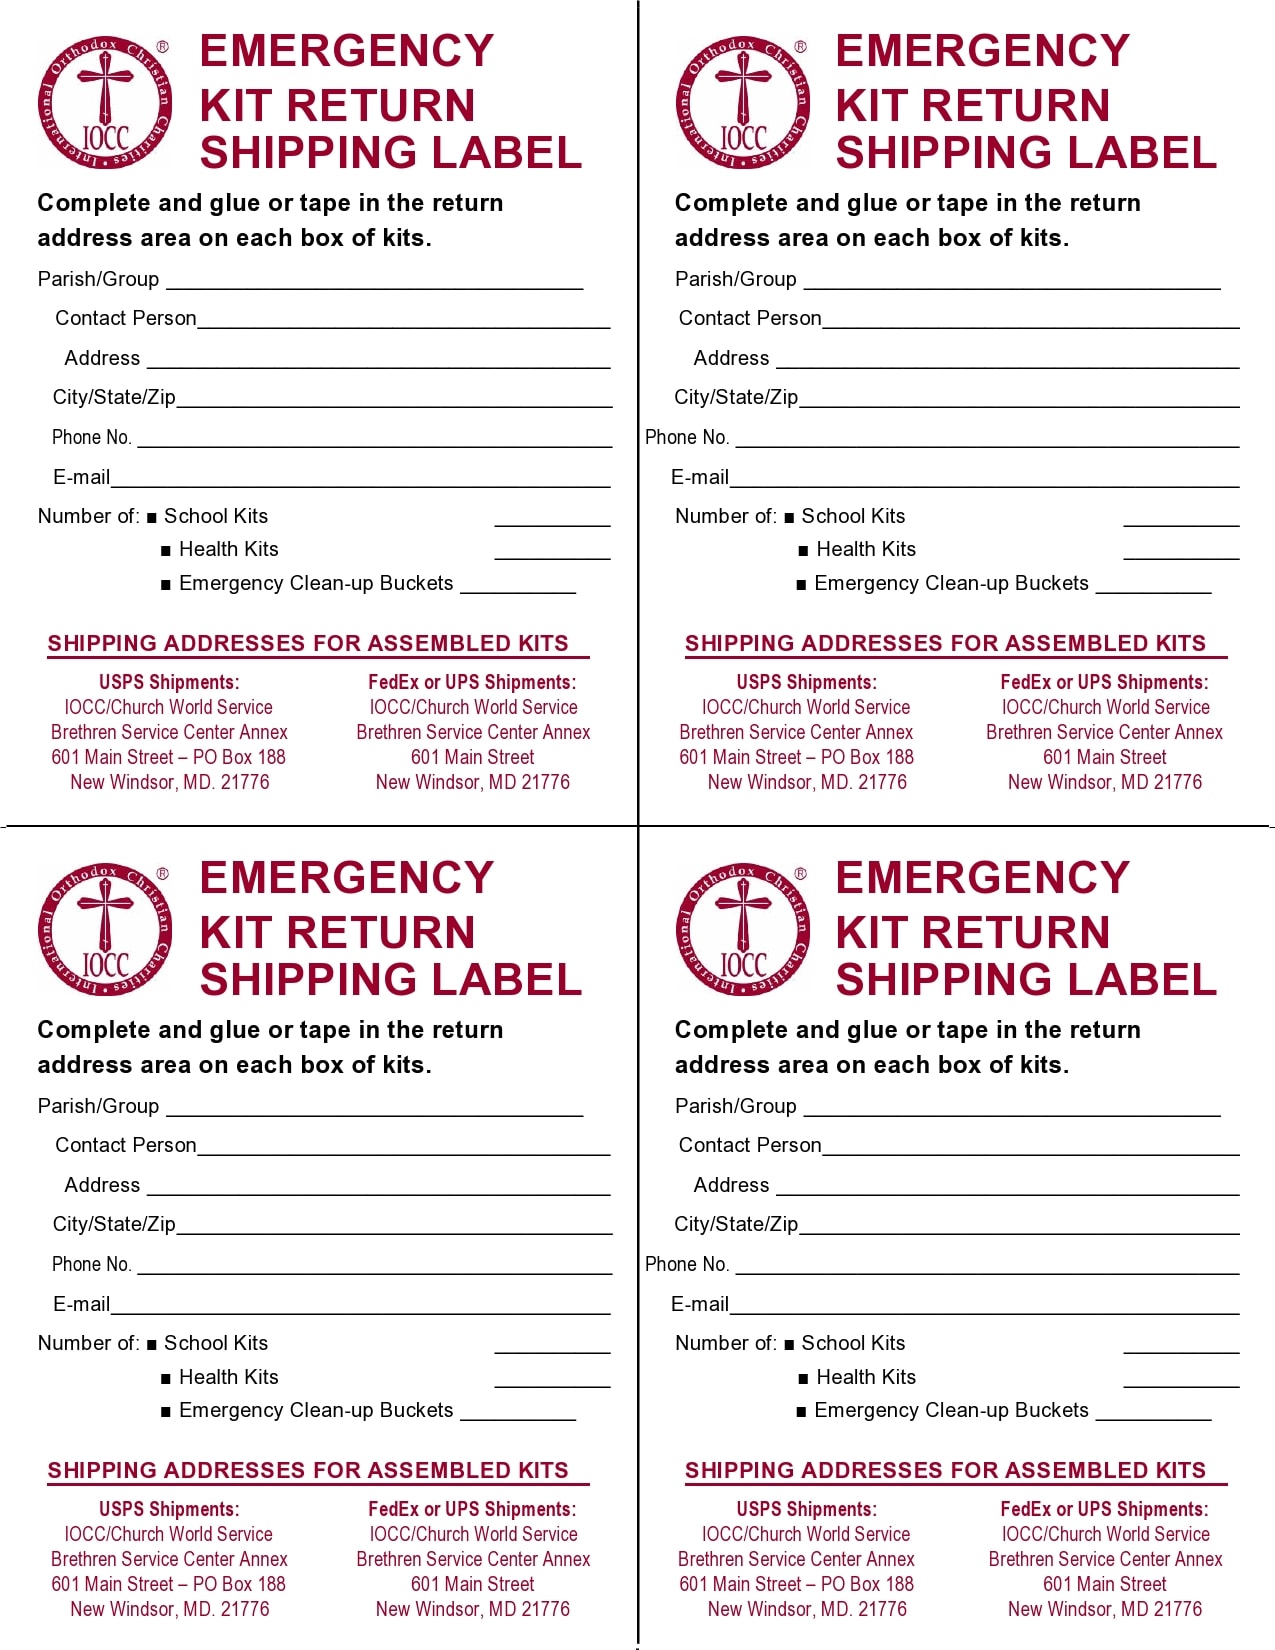 22 Printable Shipping Label Templates (Free) - PrintableTemplates With Free Printable Return Address Labels Templates